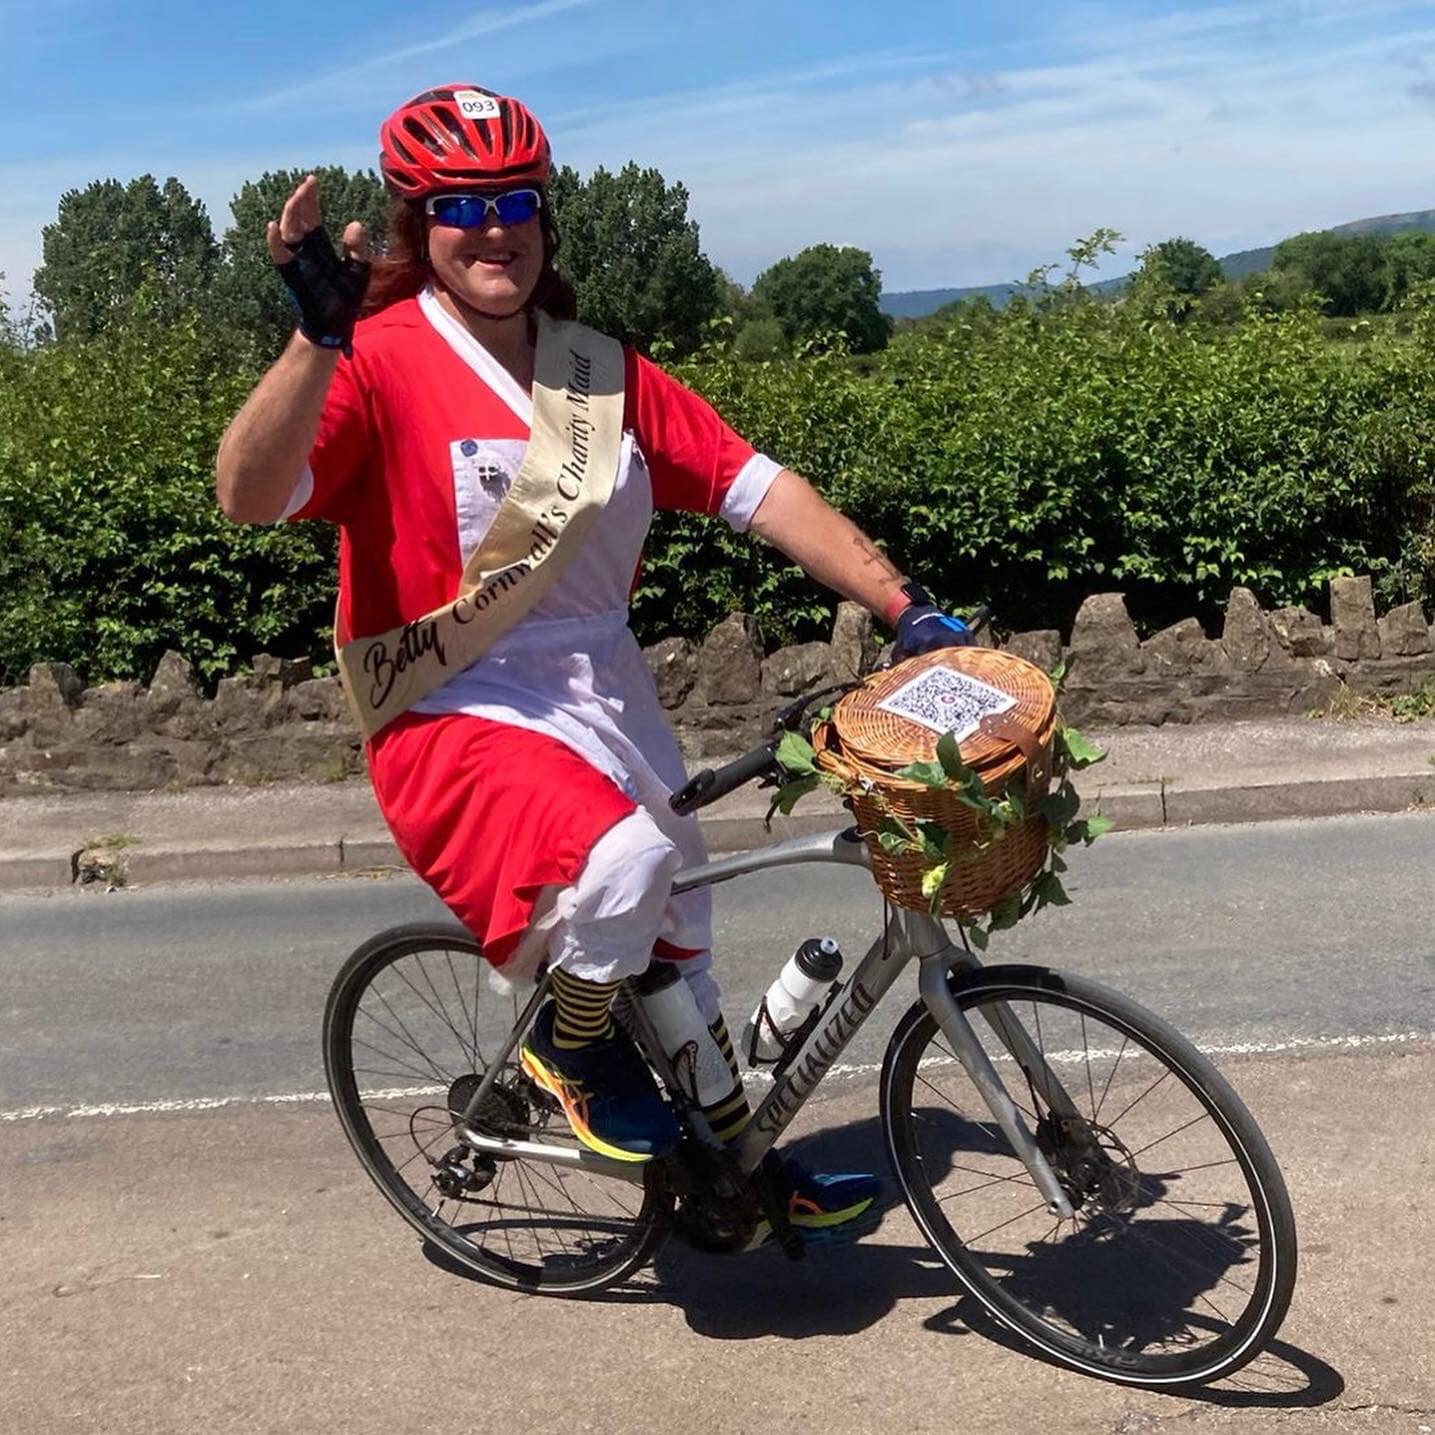 Fred Thomas as Betty Stogs raised tens of thousand of pounds for charities